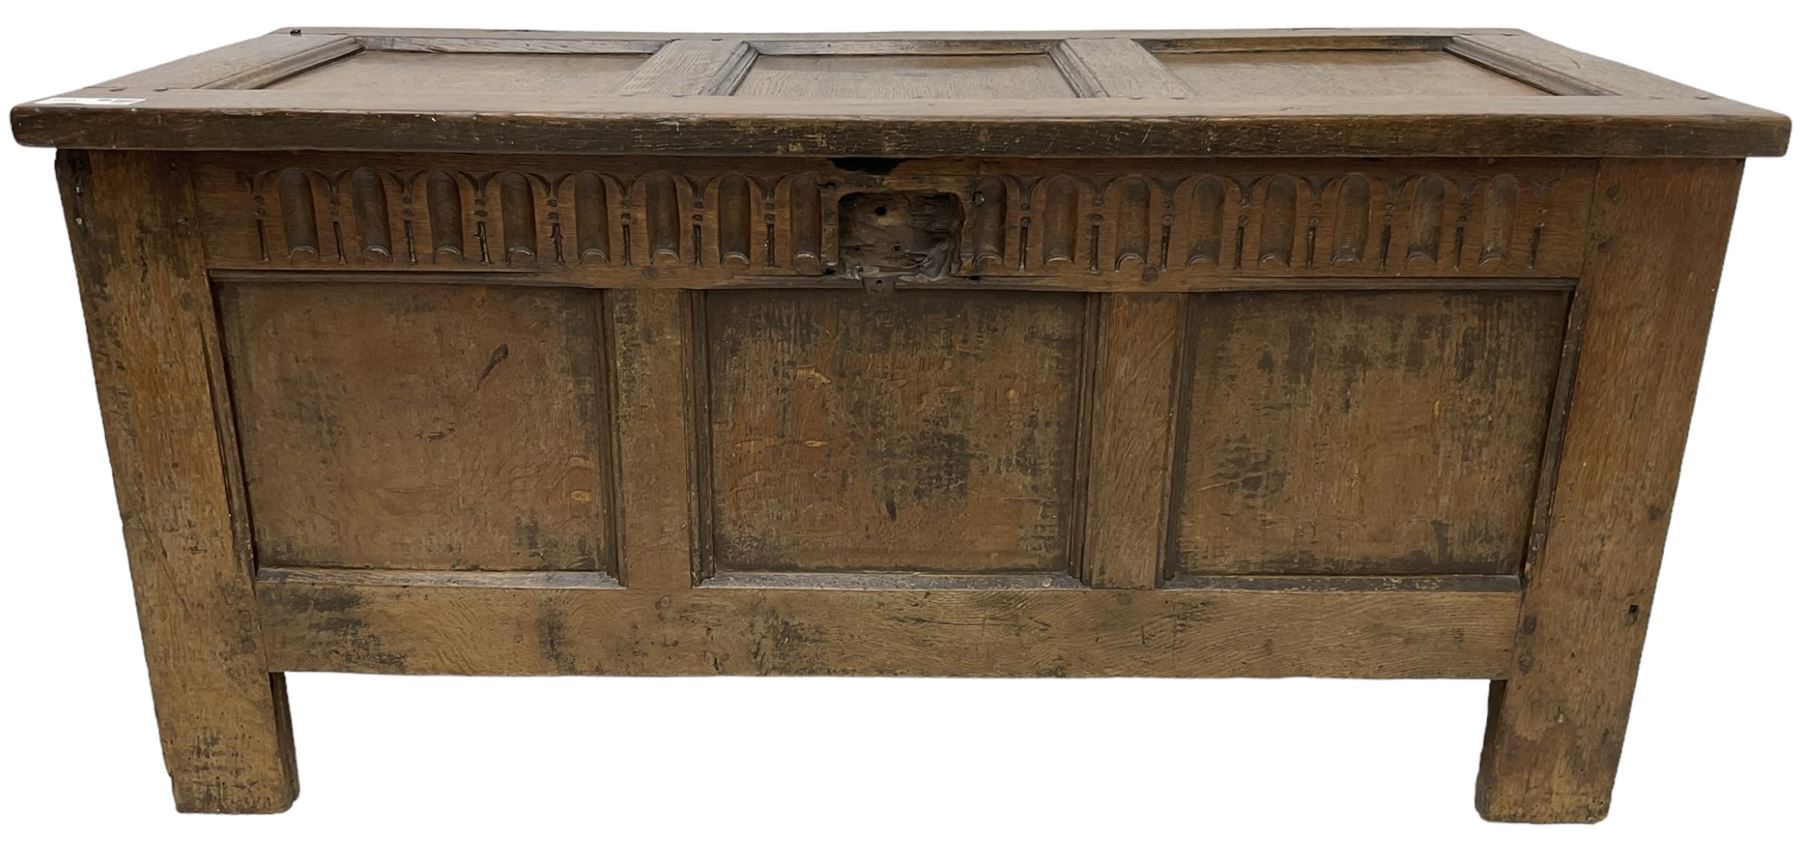 17th oak coffer or blanket chest - Image 2 of 6